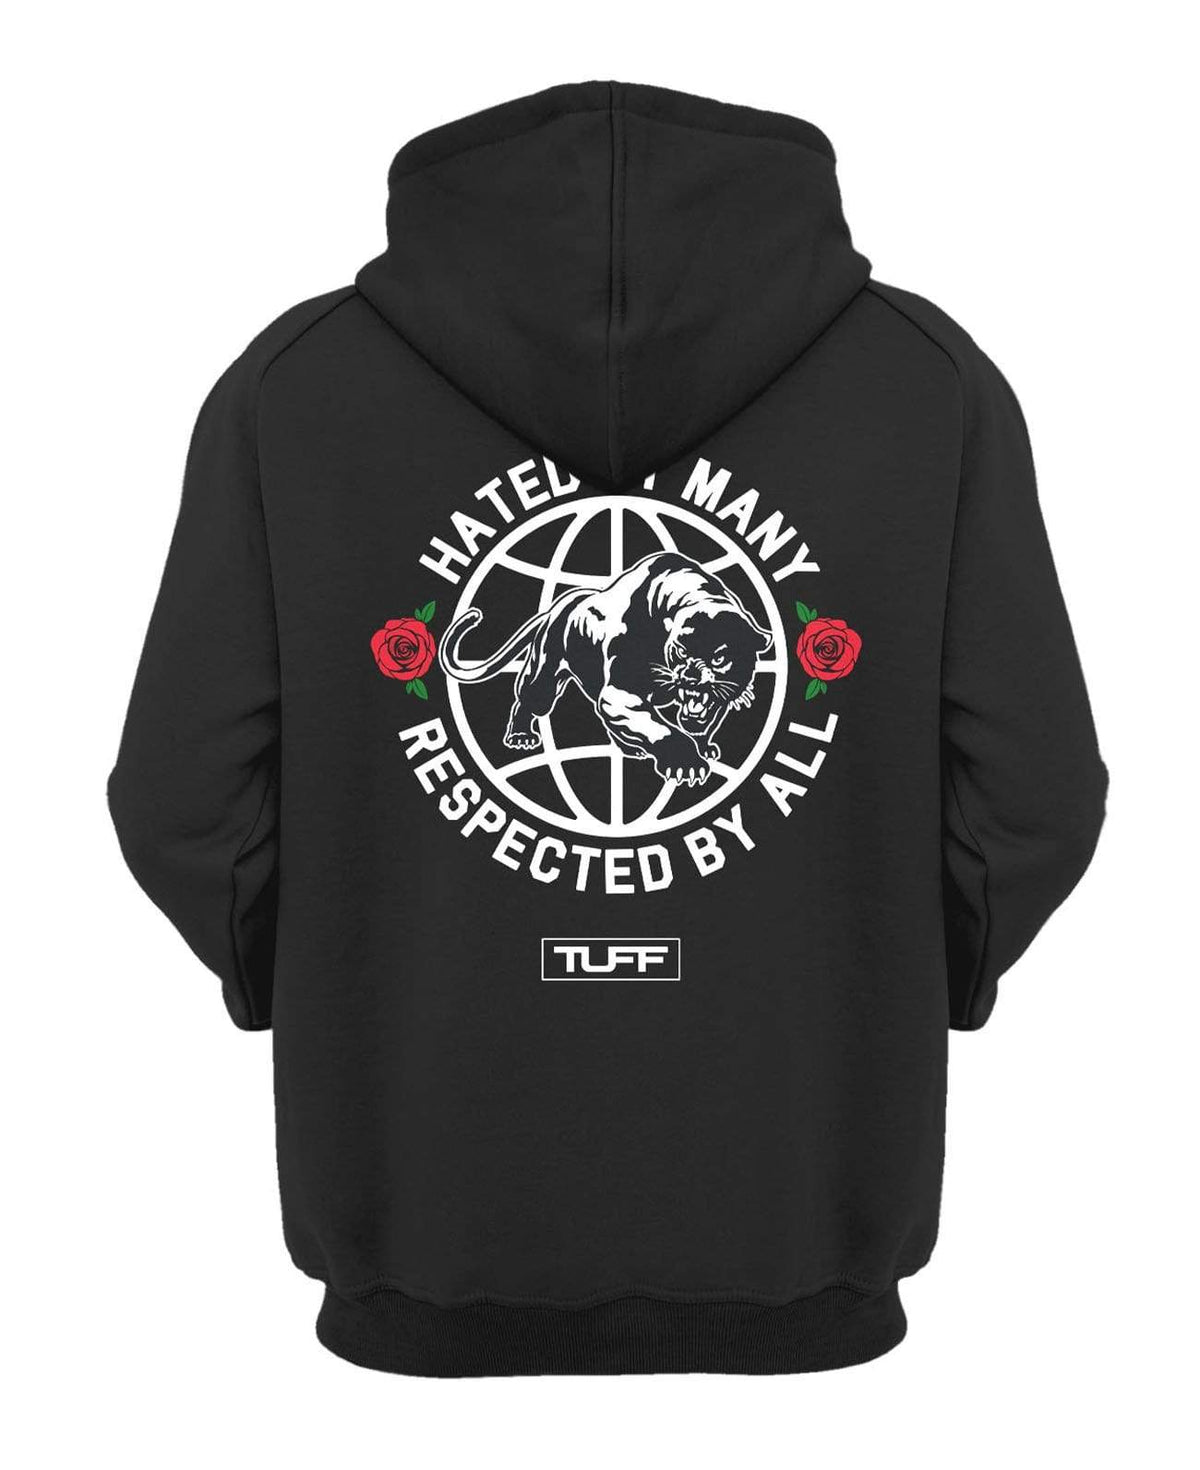 Hated By Many, Respected By All Hooded Sweatshirt XS / Black TuffWraps.com